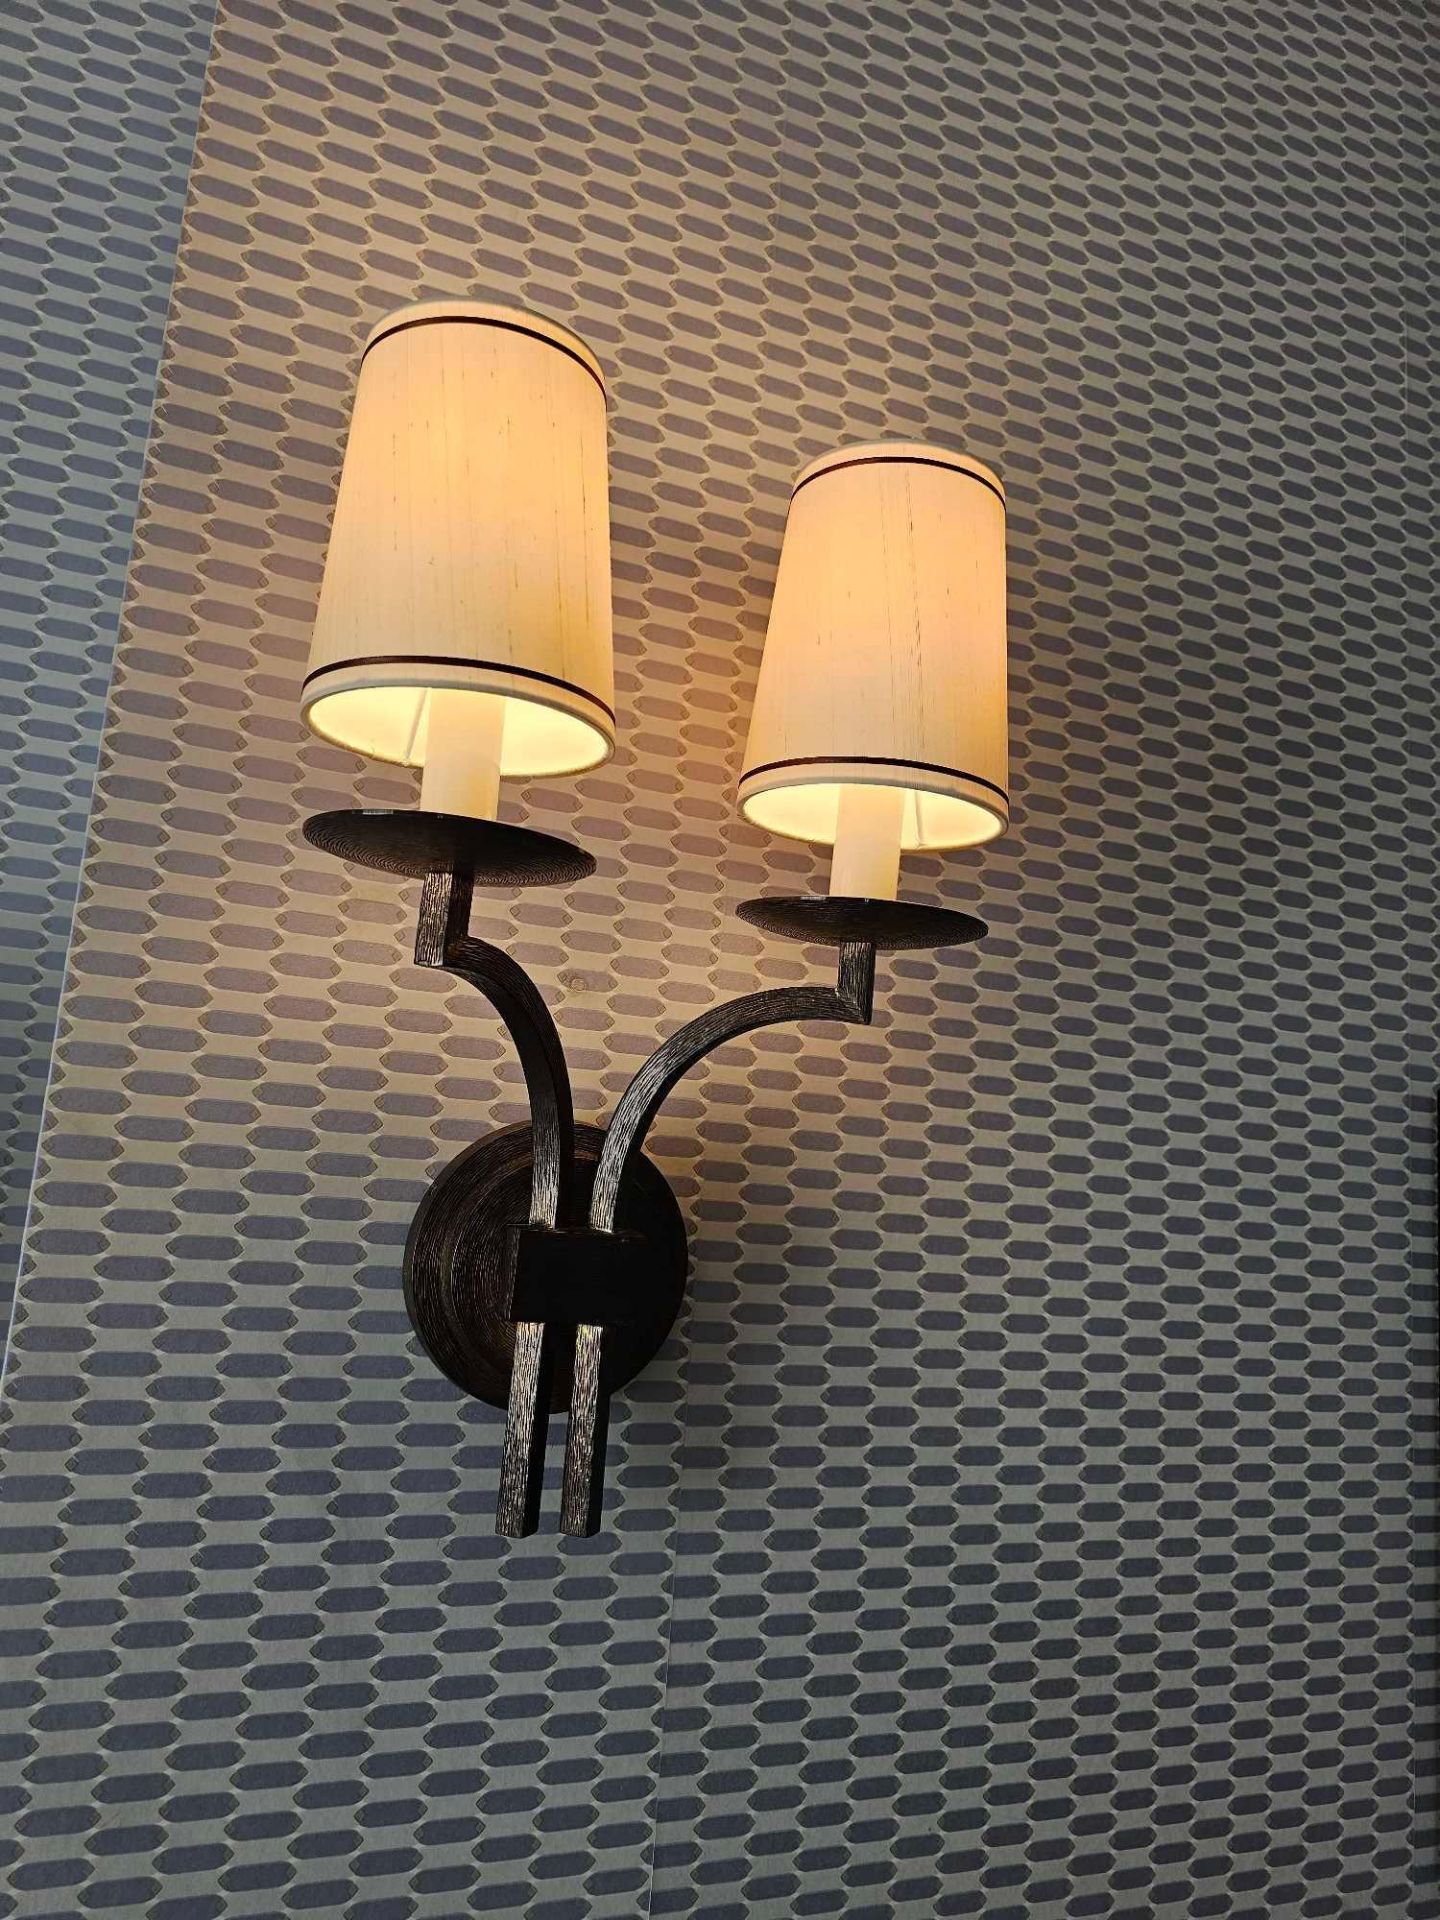 A Pair Of Dernier And Hamlyn Twin Arm Antique Bronzed Wall Sconces With Shade 51cm (Room 816) - Image 3 of 4